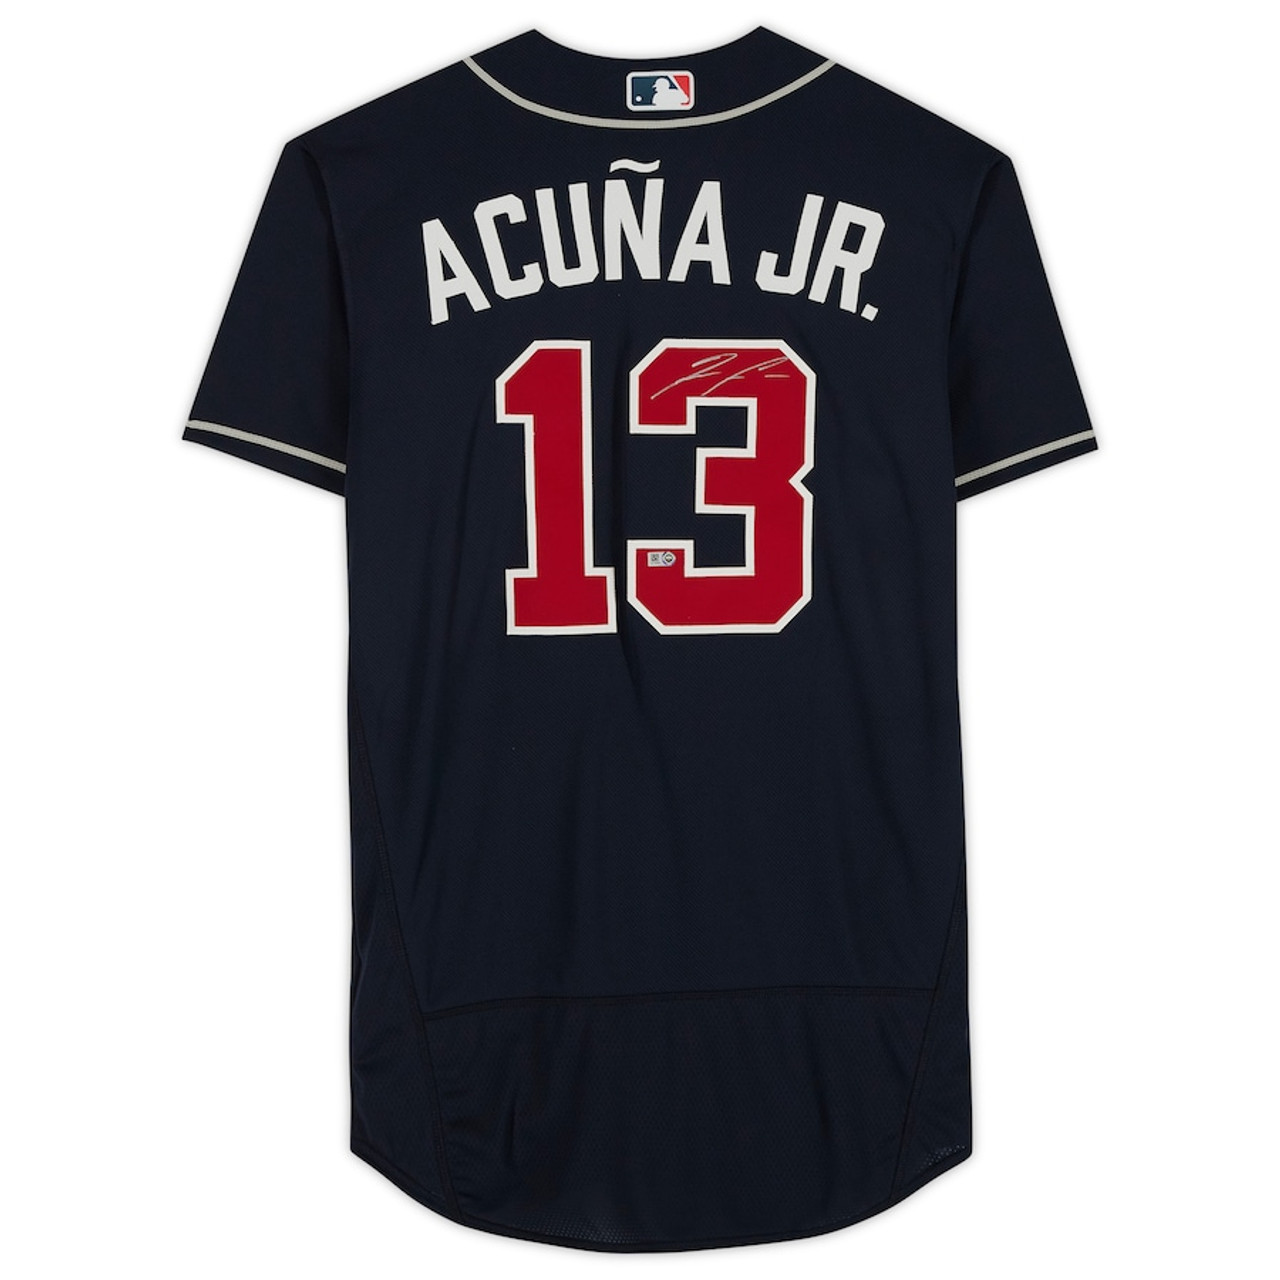 Autographed Atlanta Braves Acuna Jr. Jersey With Authentication for